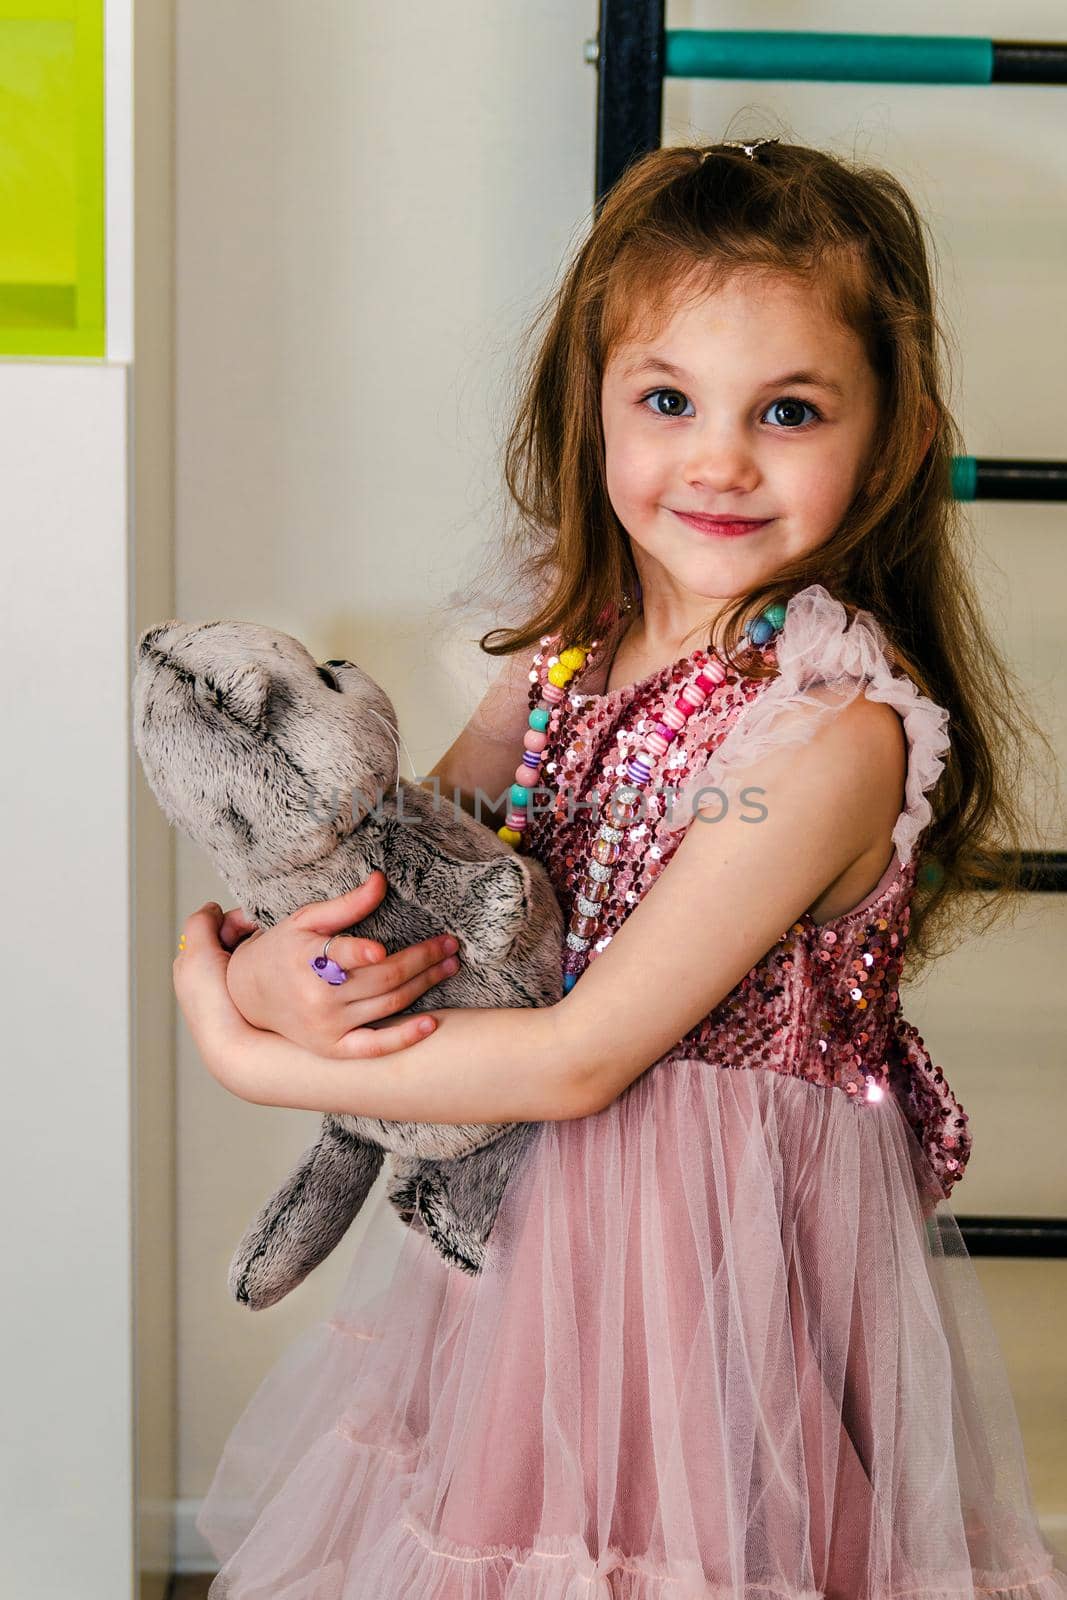 A little girl in a pink dress with a plush toy plays in her room, close-up.